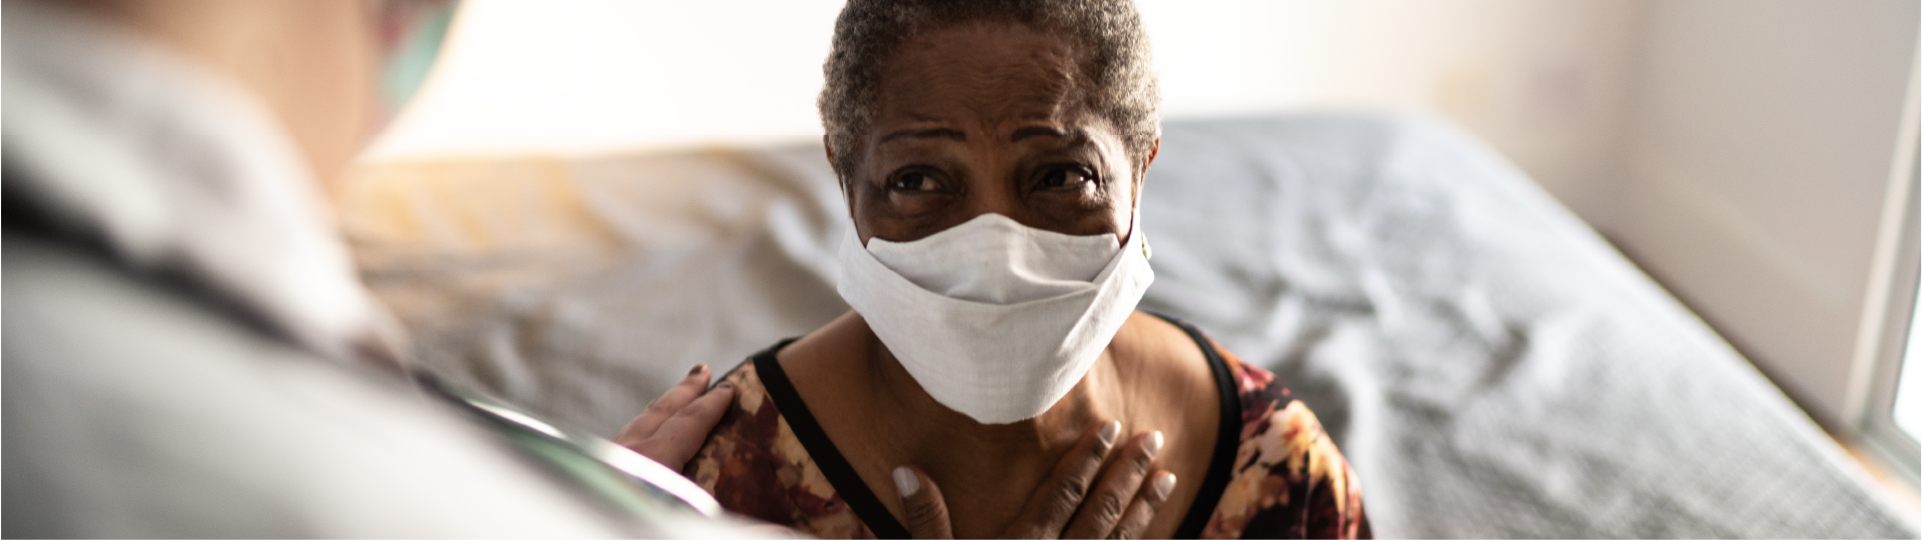 Patient speaks with doctor, with a hand on chest and wearing a mask.